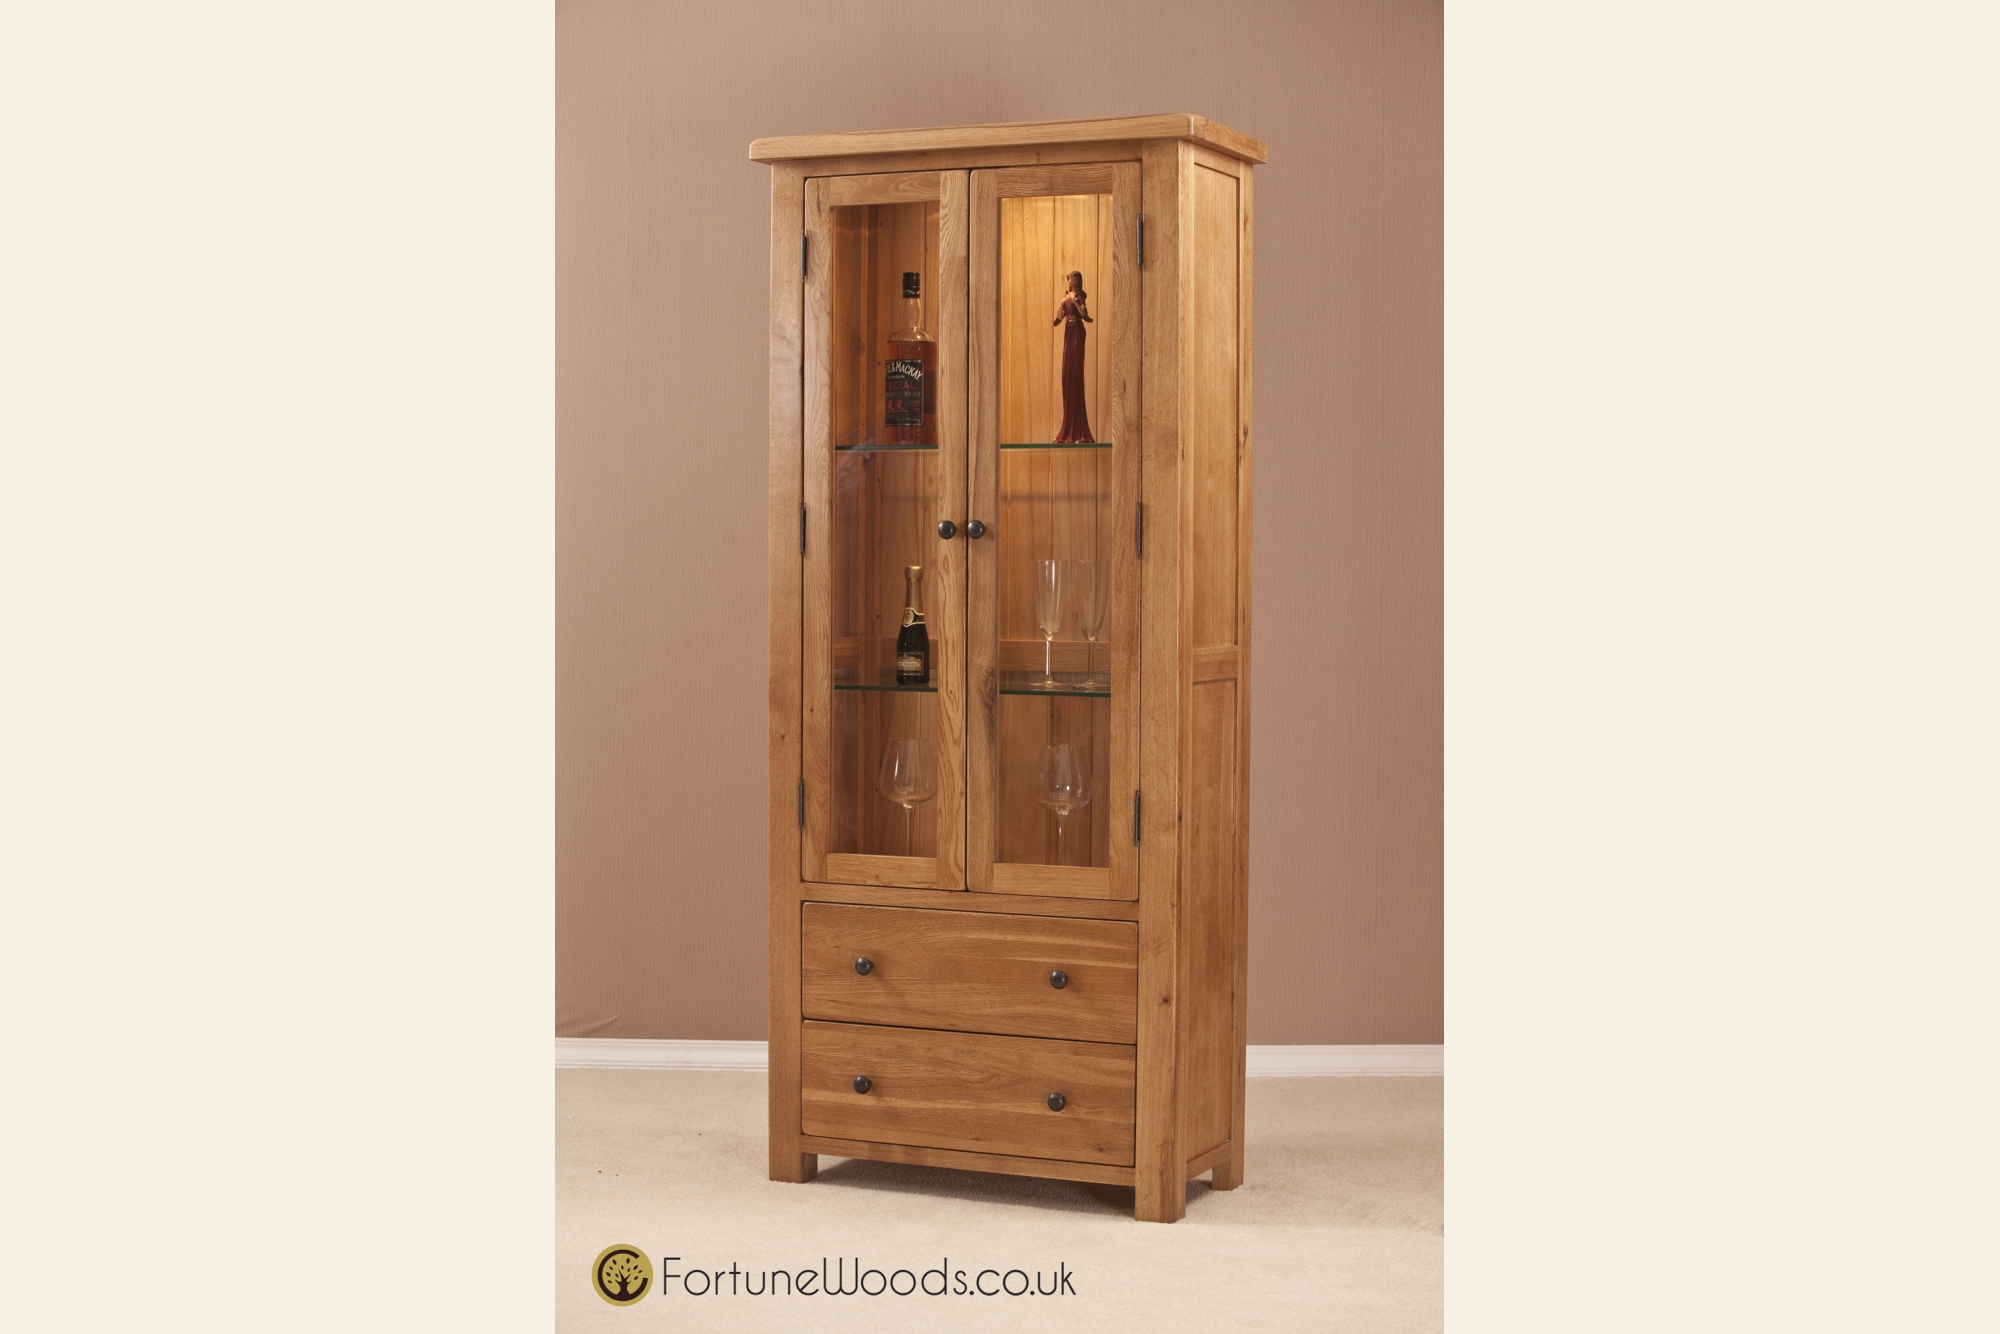 Fortune Woods Cotswold Glass Display Cabinet